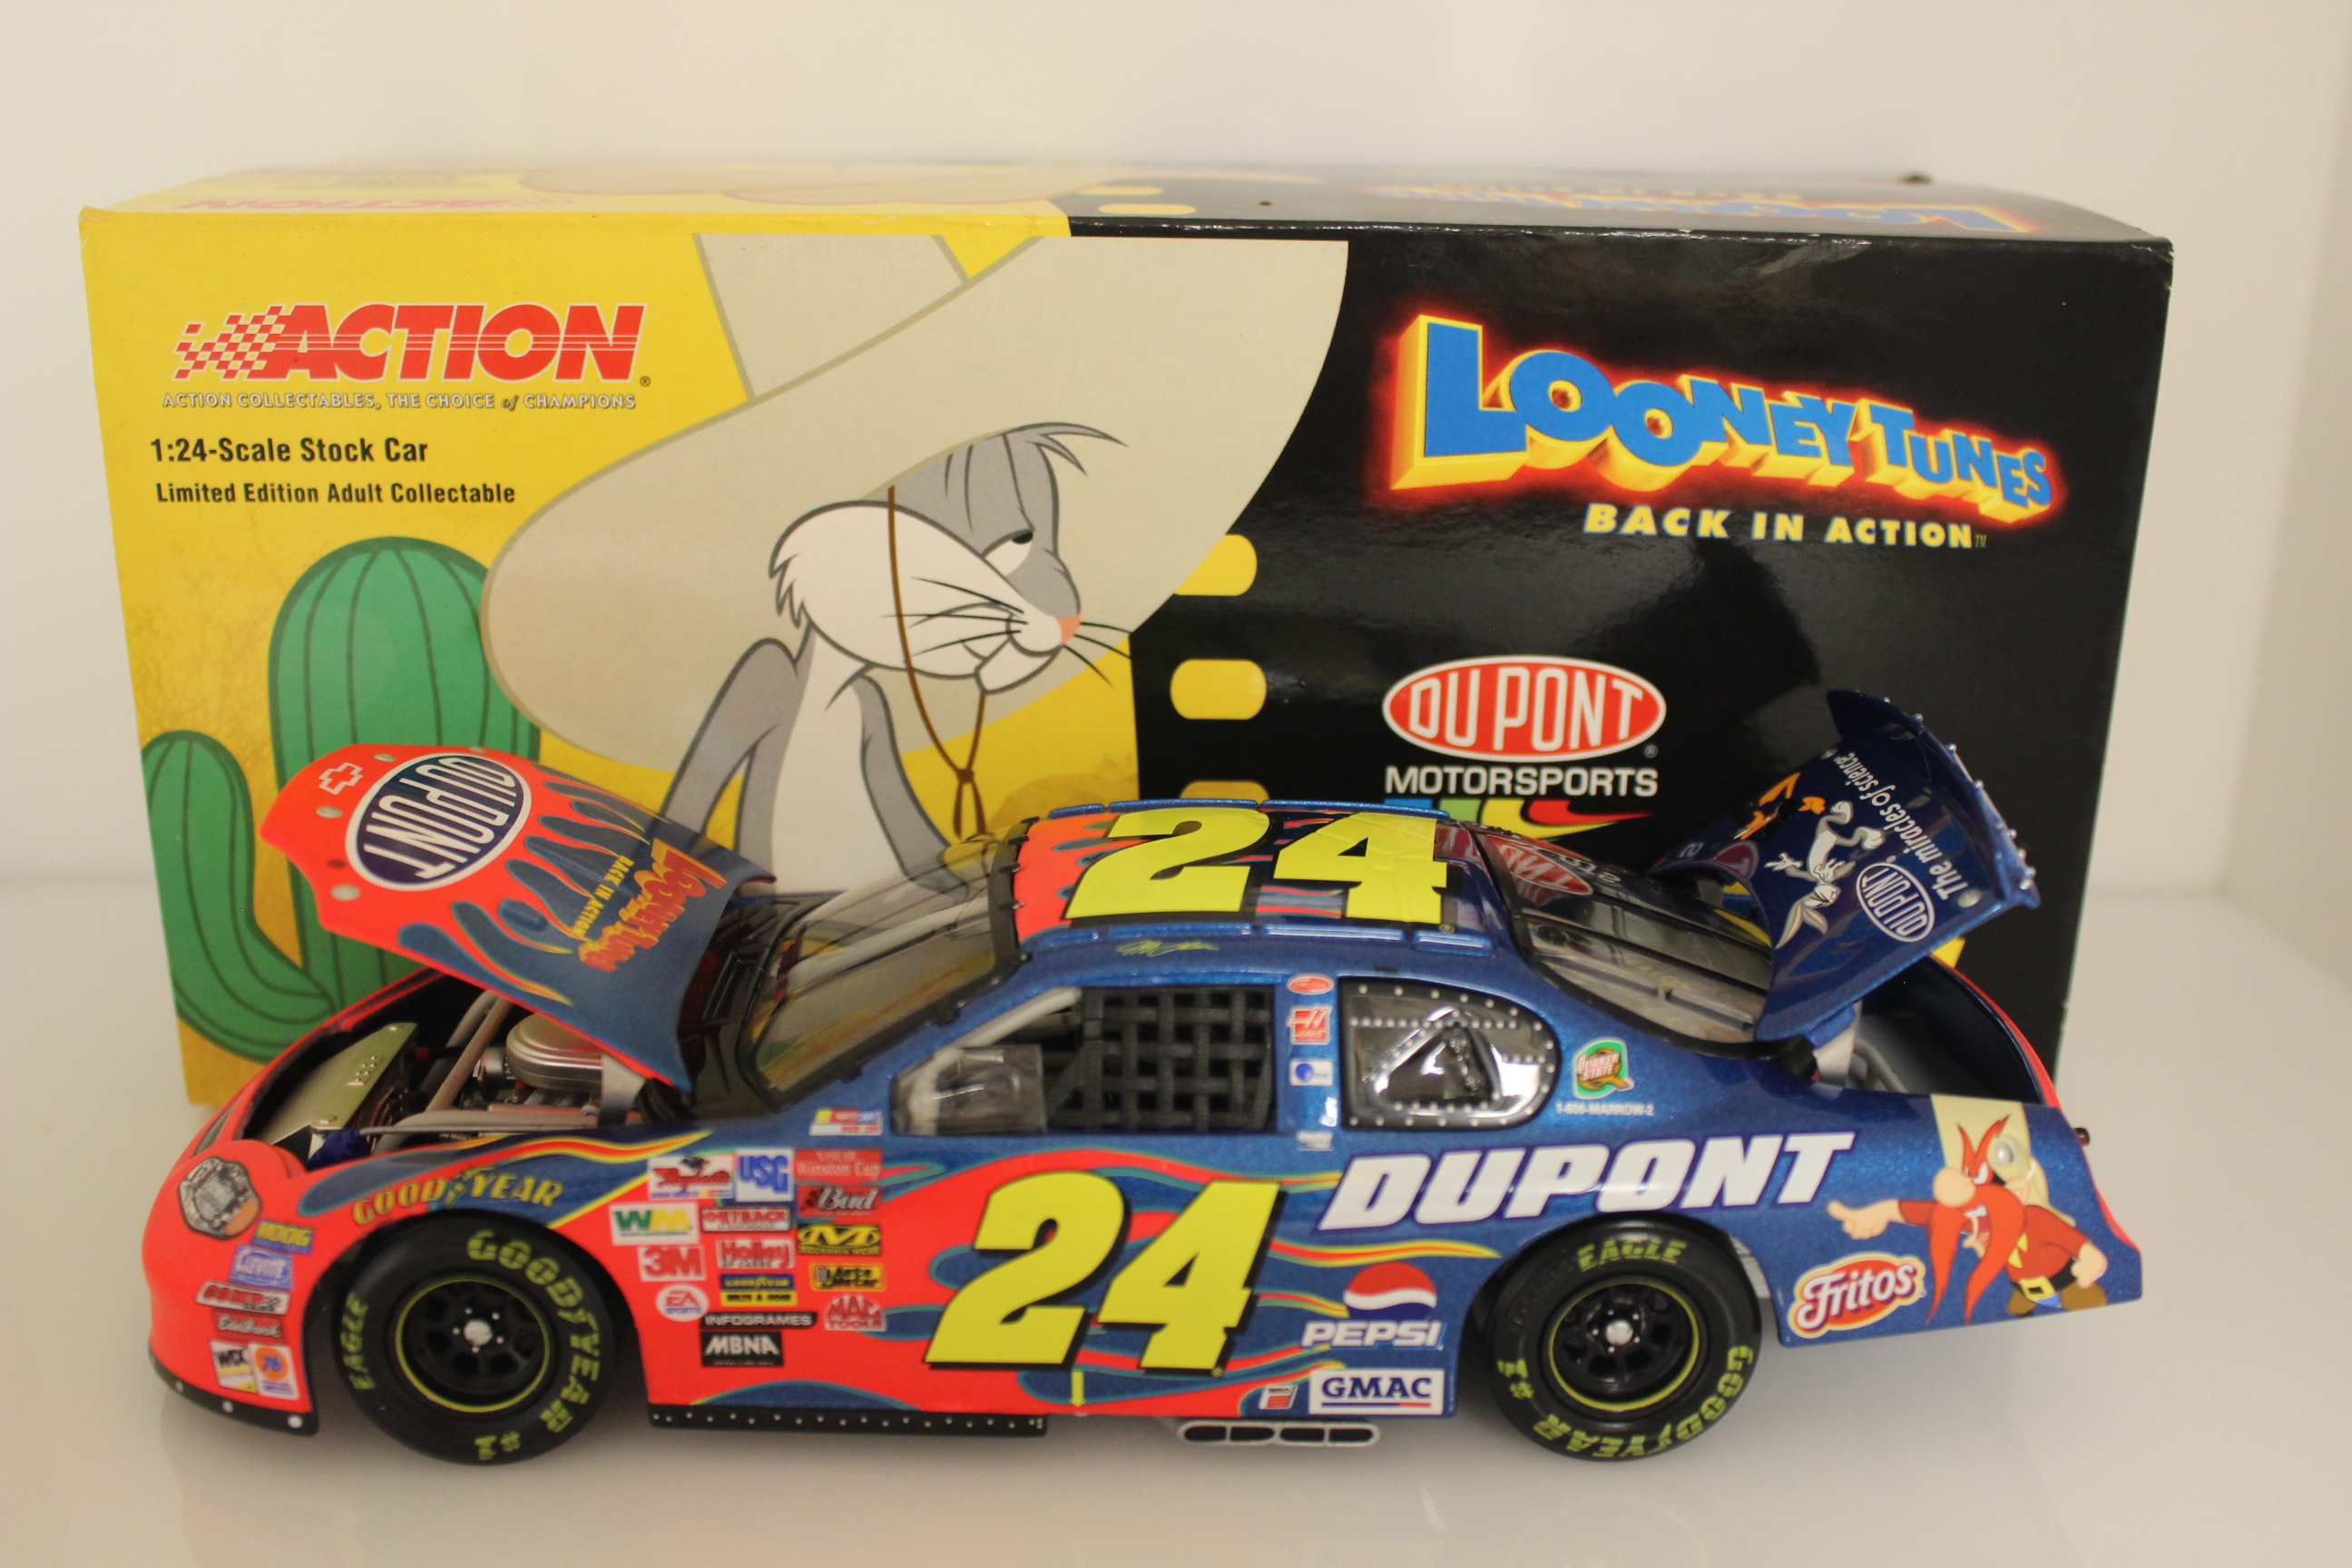 Jeff Gordon 2003 DuPont / Looney Tunes Back in Action 1:24 Nascar Diecast